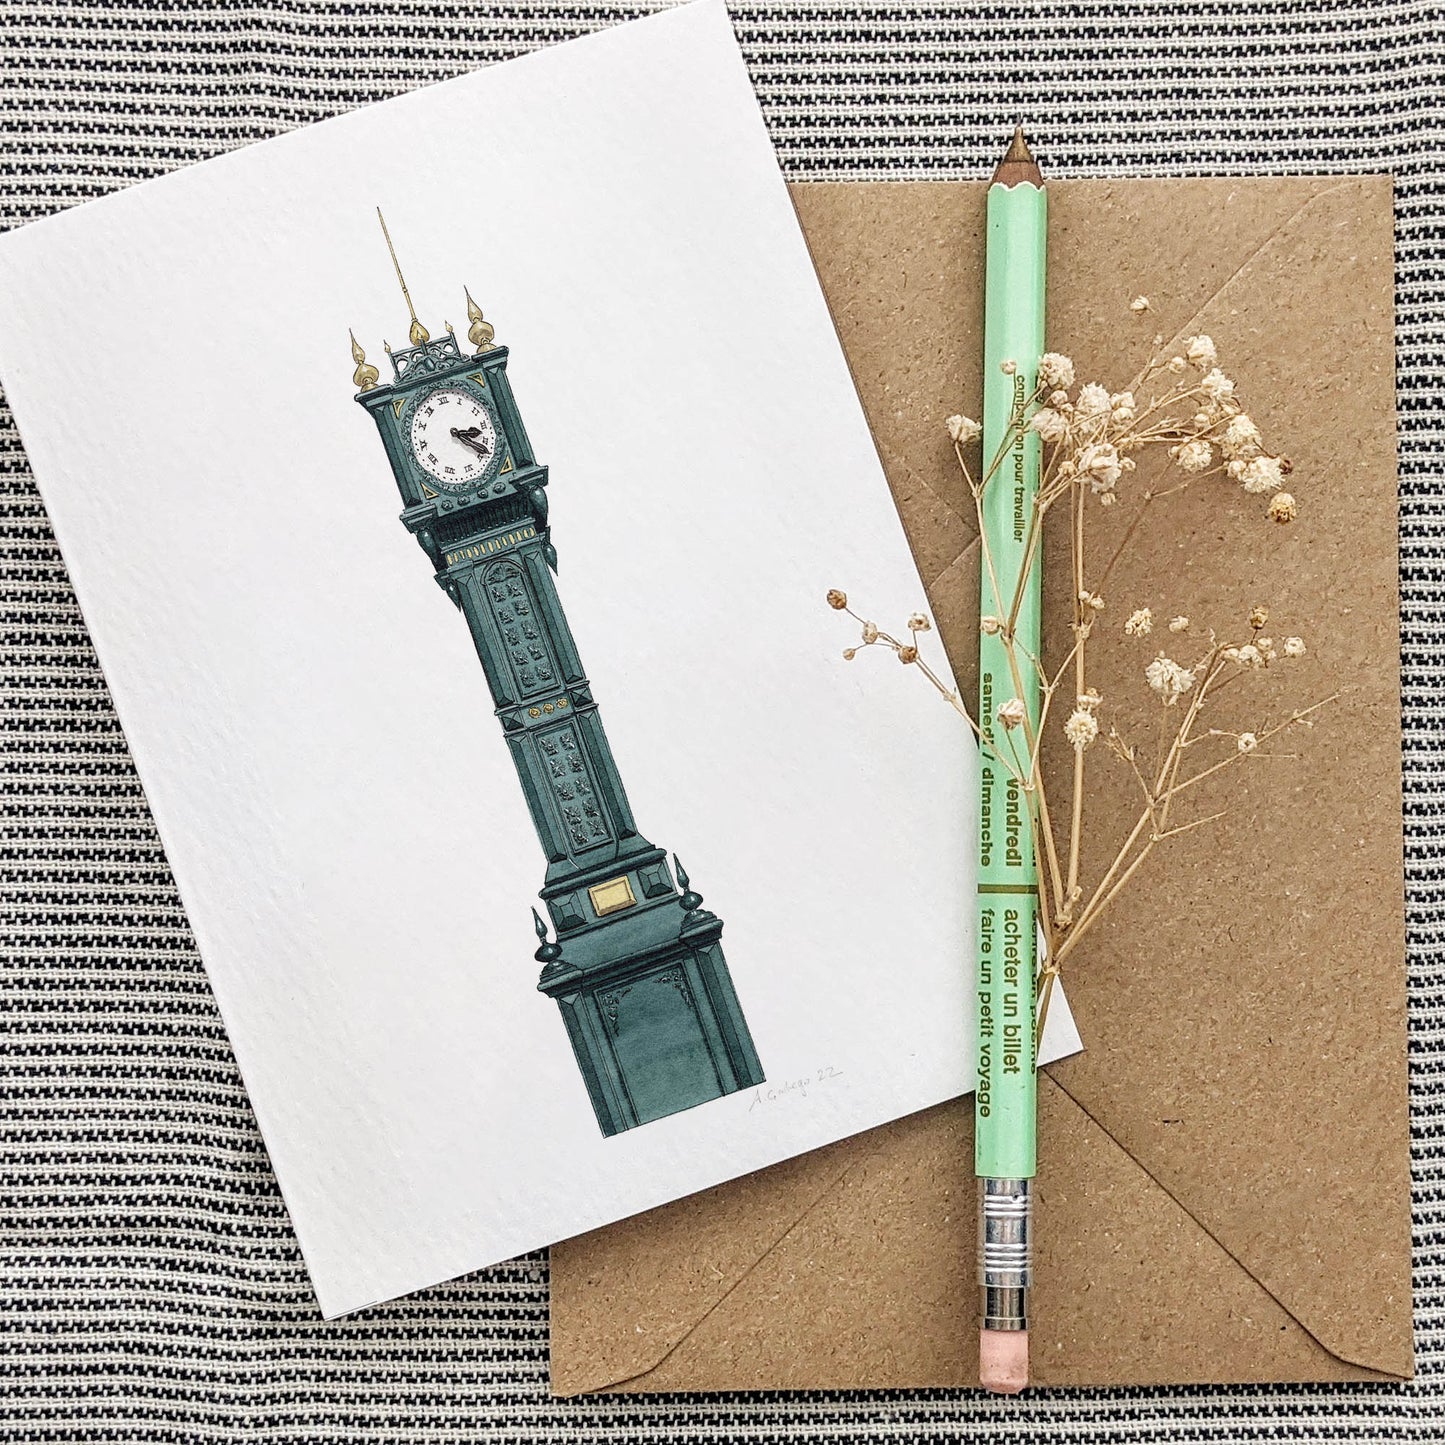 Herne Hill - Brockwell Park Clock - Greeting card with envelope